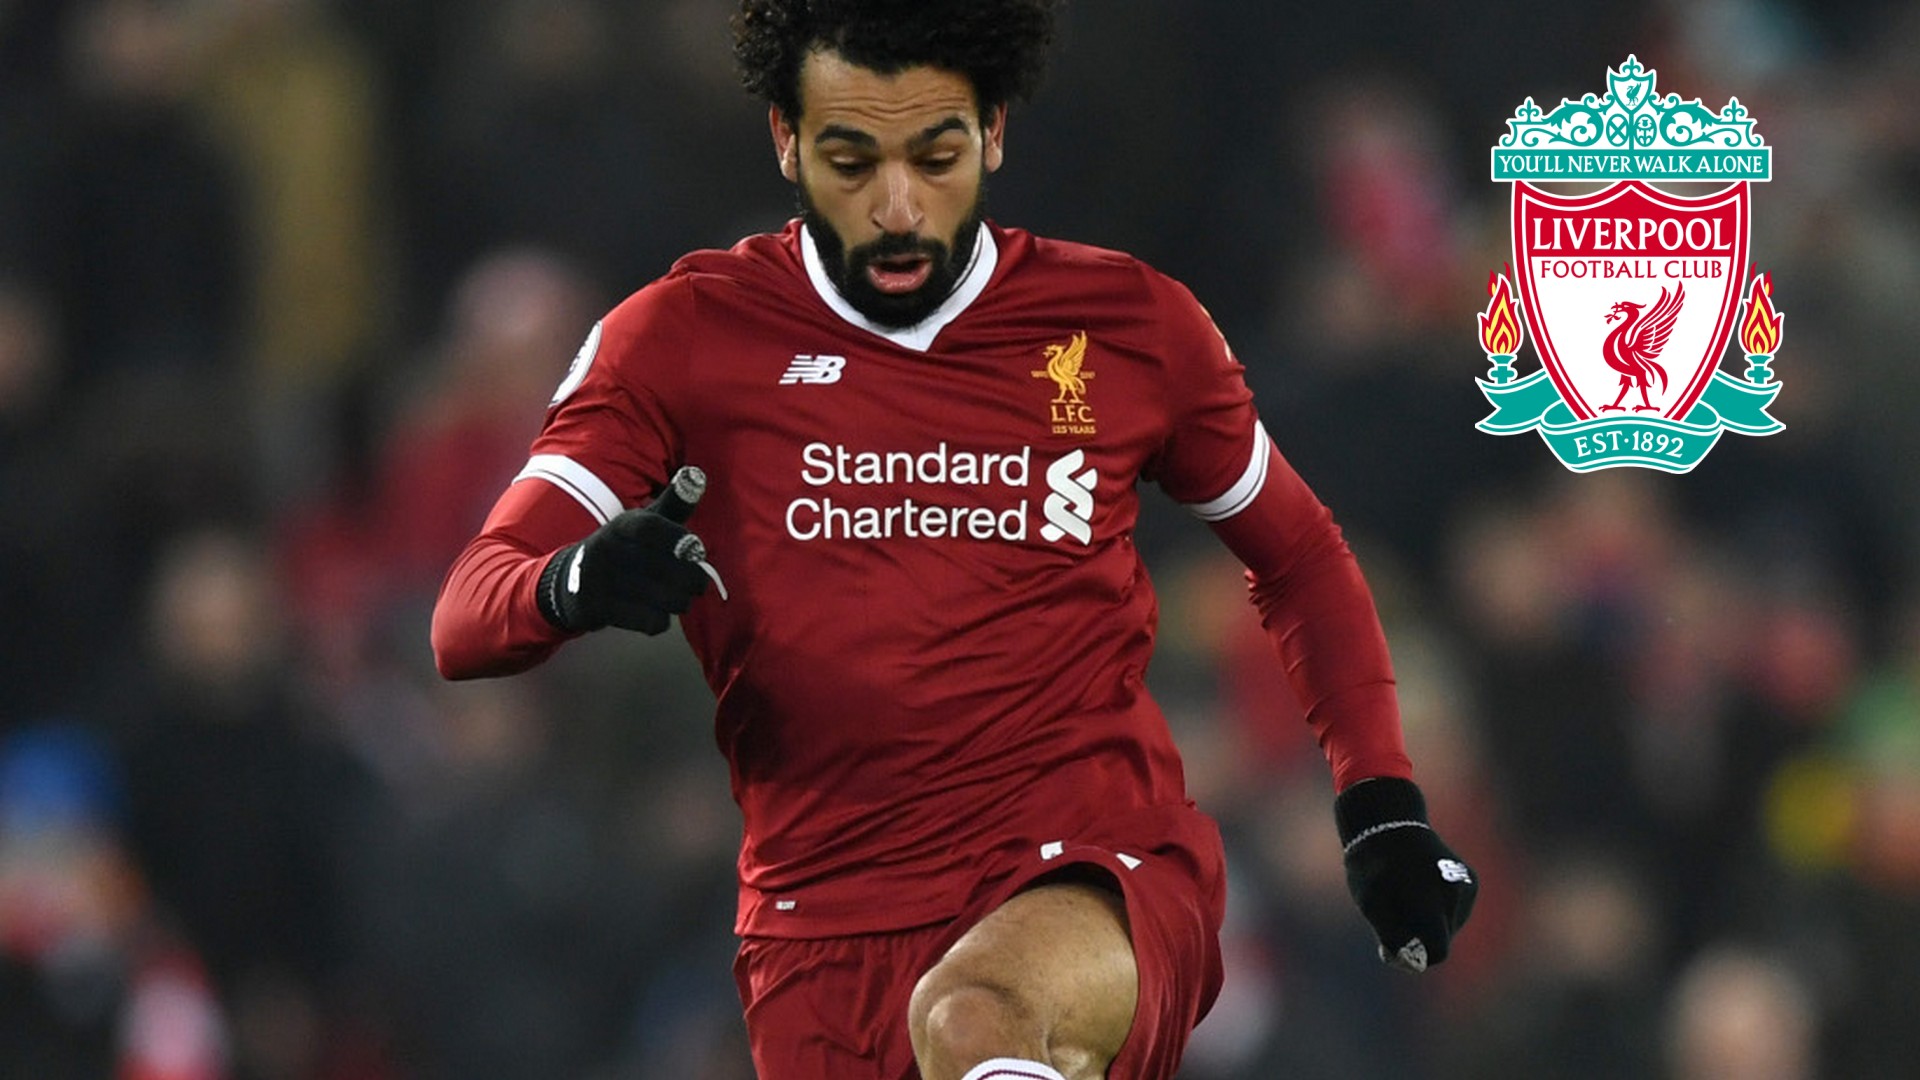 Mohamed Salah Liverpool Wallpaper For Desktop with resolution 1920X1080 pixel. You can use this wallpaper as background for your desktop Computer Screensavers, Android or iPhone smartphones